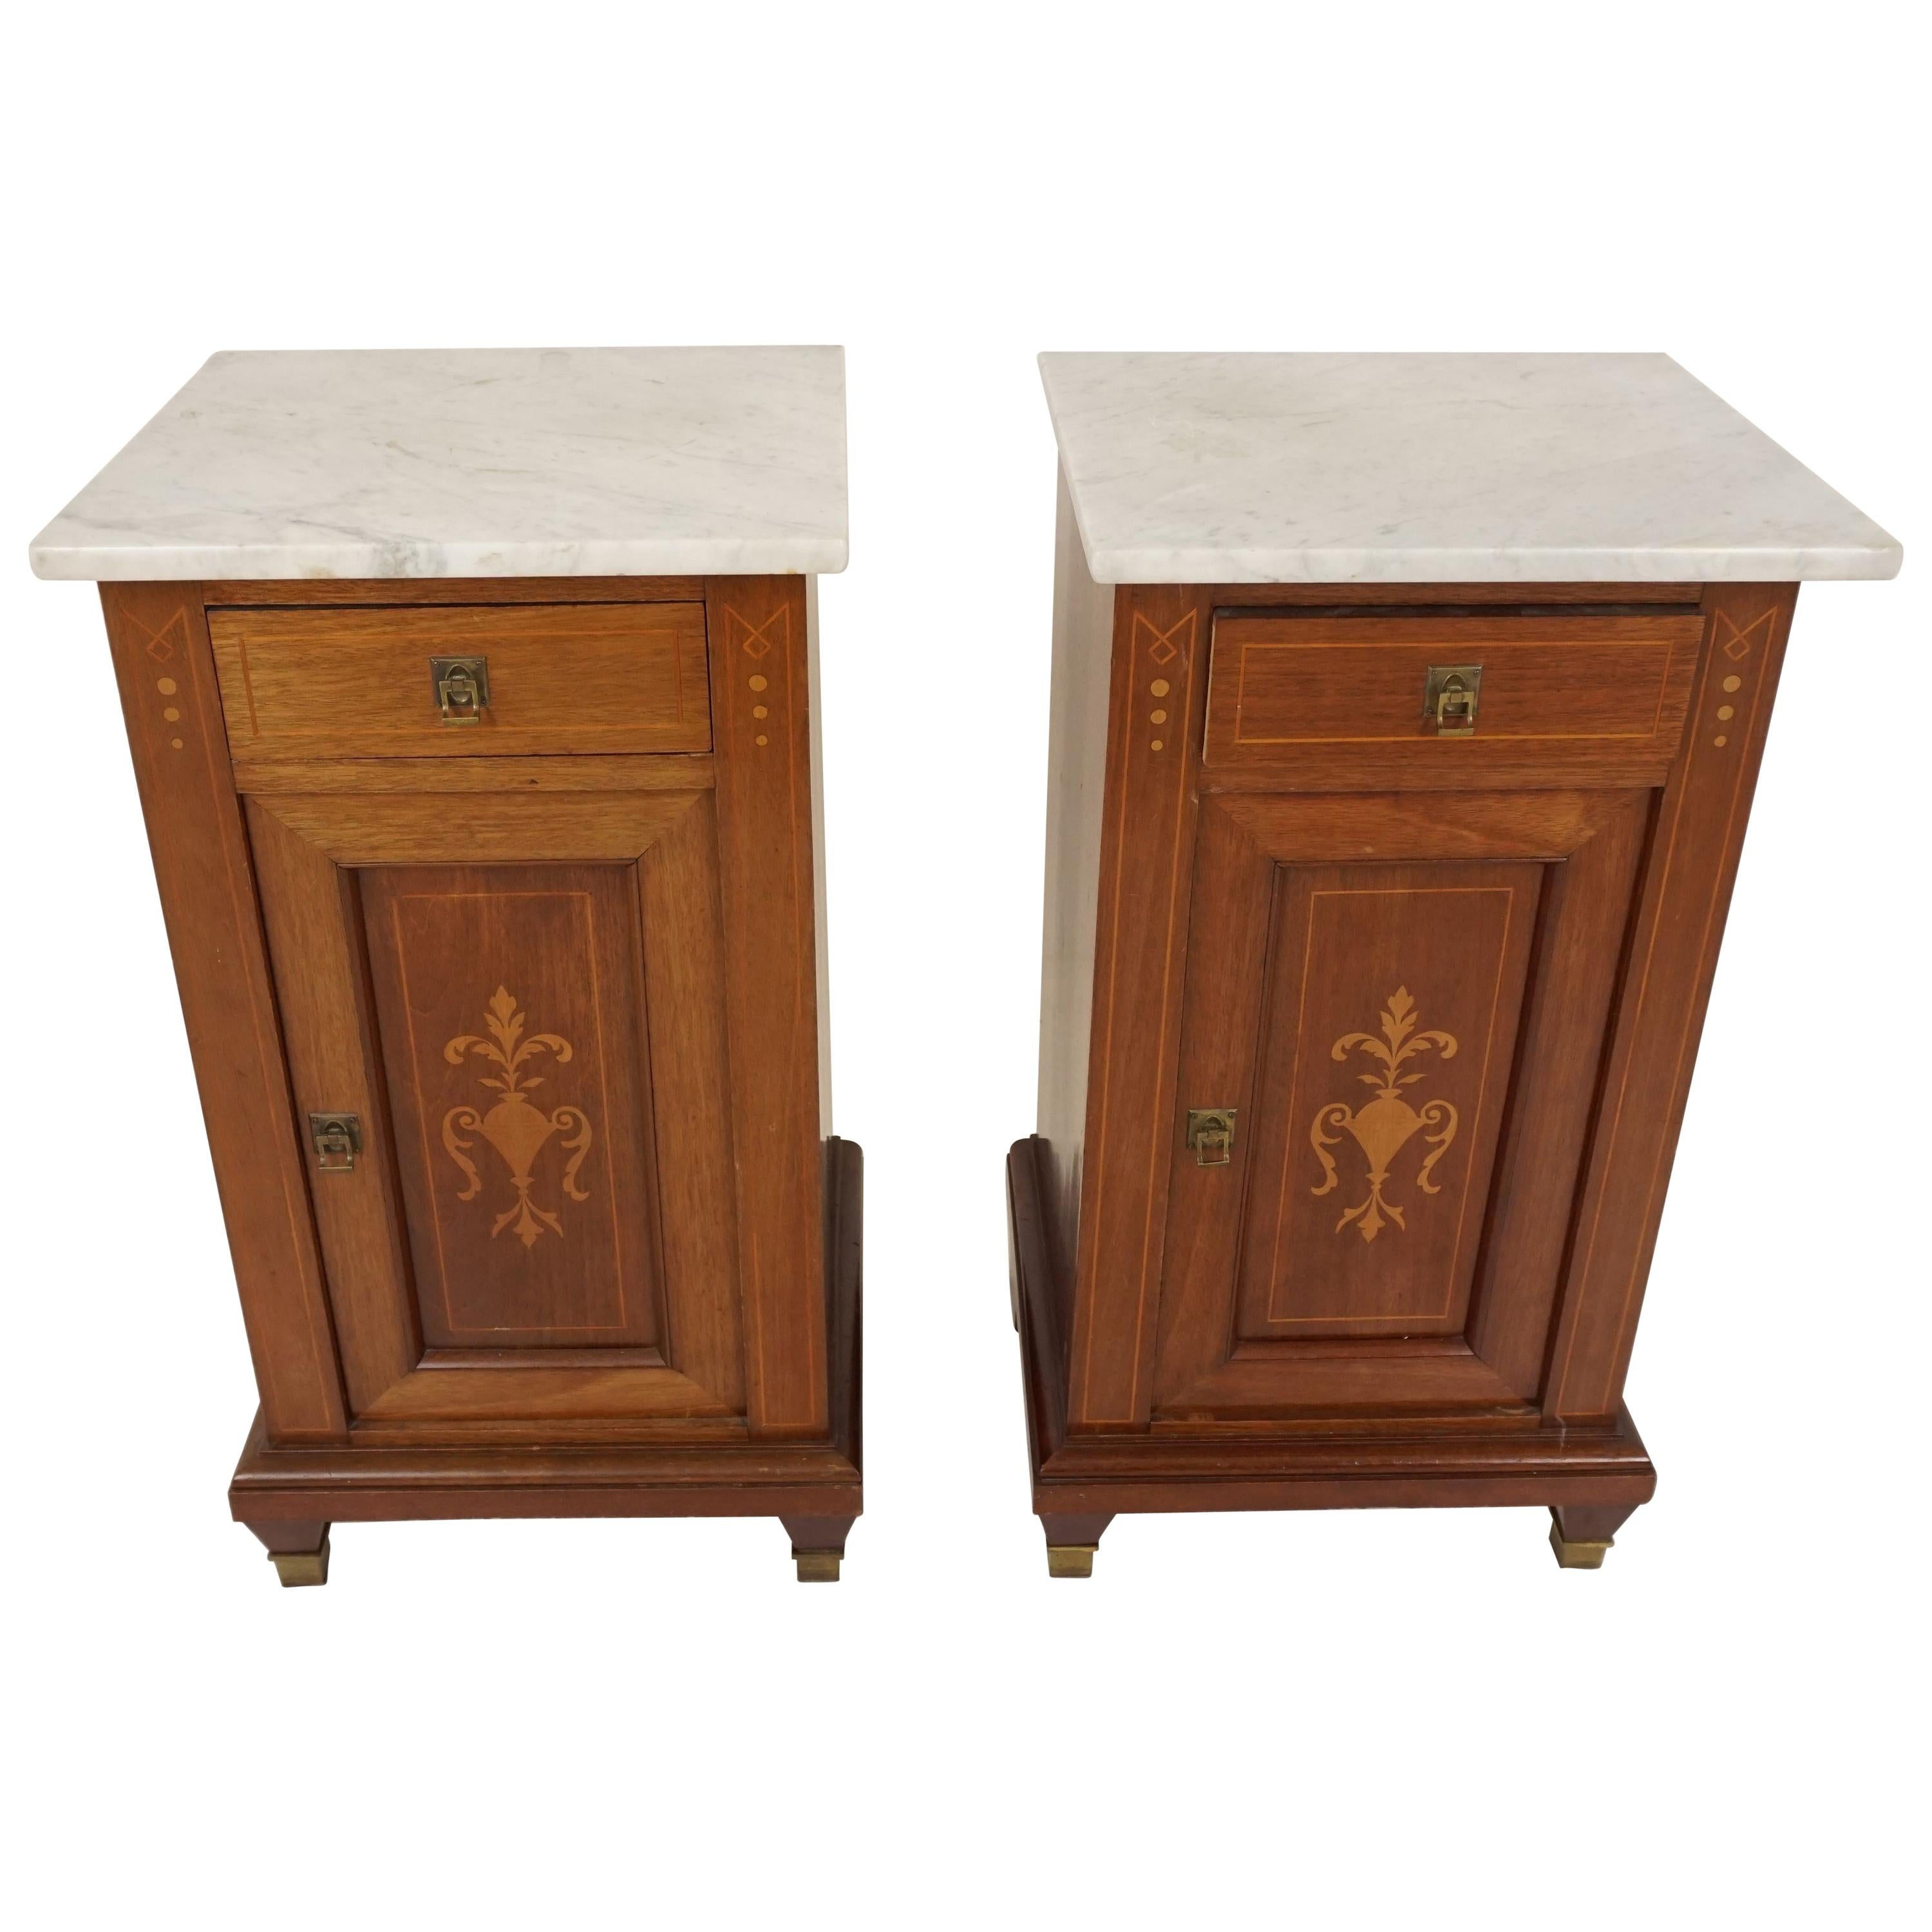 Antique Pair of Nightstands, Continental Inlaid Mahogany Bedside, Scotland 1900